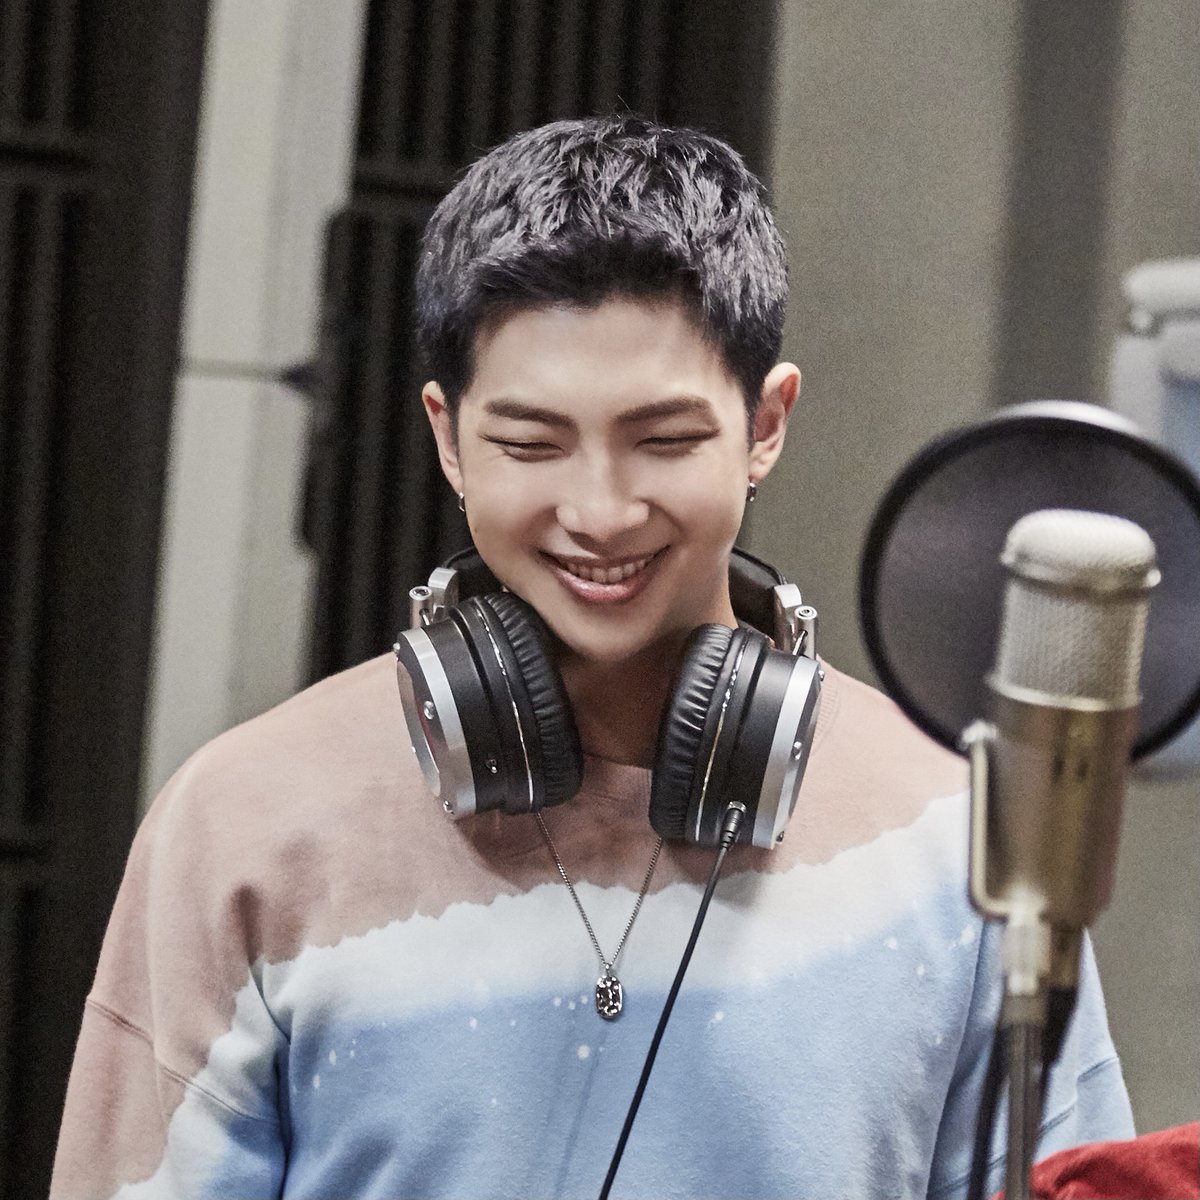 RM’s has always used his powerful voice to encourage people to love themselves. But what is he recording this time? 
The clue will come out @ LA stage! 💜

#Hyundai #BTS #HyundaixBTS #RM #Imonit #Nowyoureonit #CleanMobility #BecauseofYou 
@bts_bighit